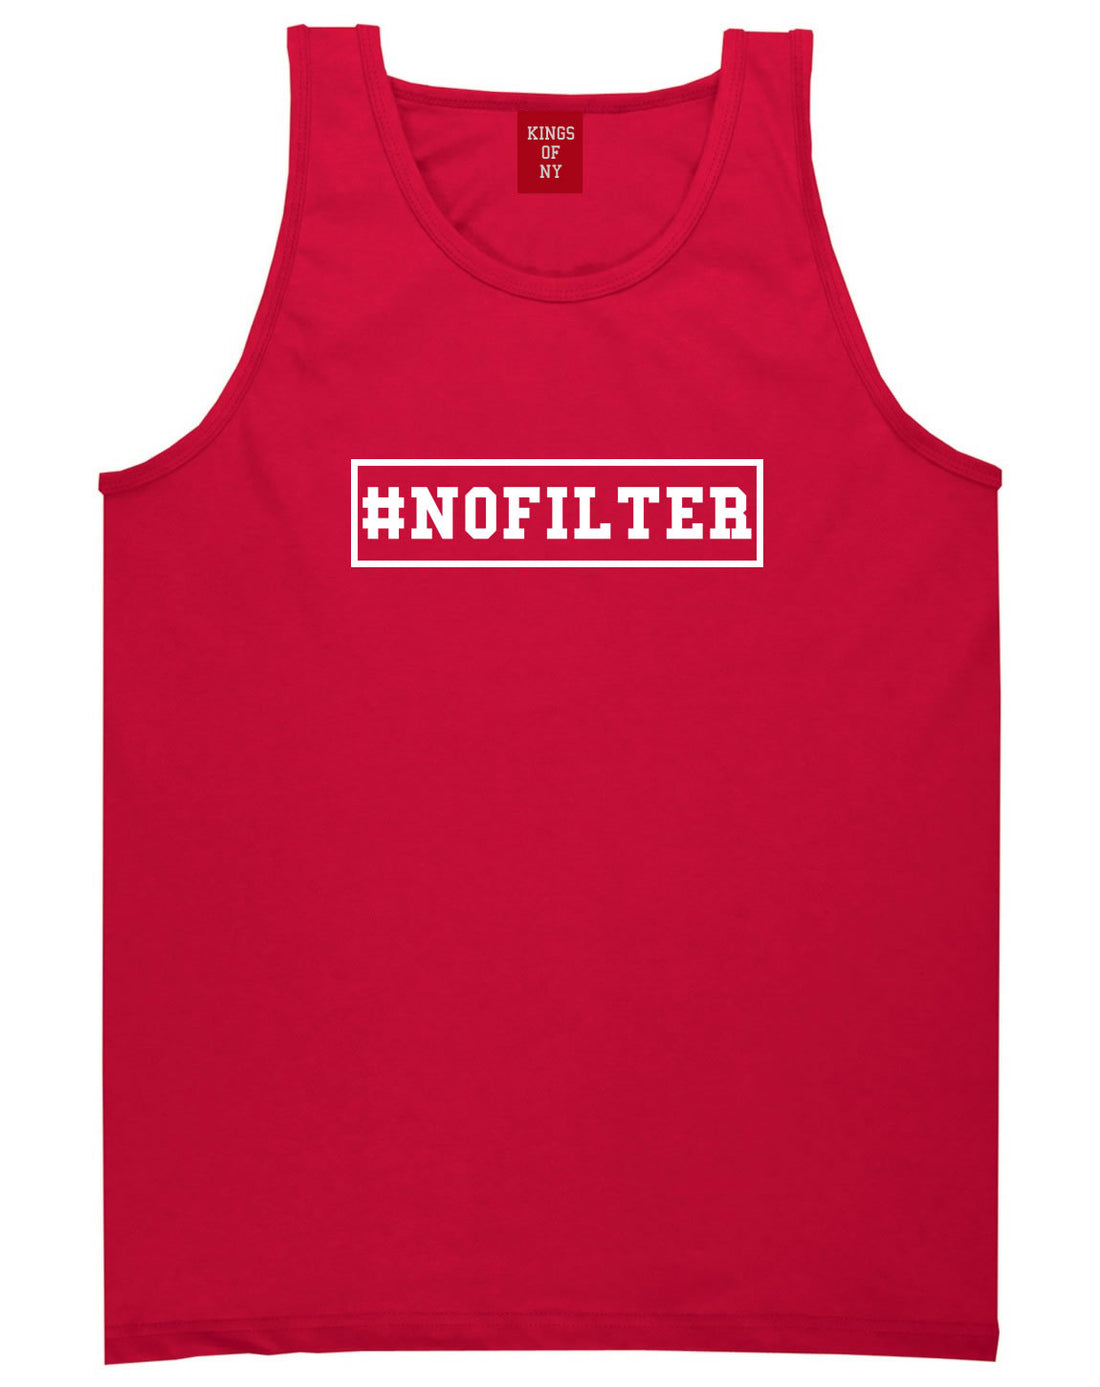 No Filter Selfie Tank Top in Red By Kings Of NY